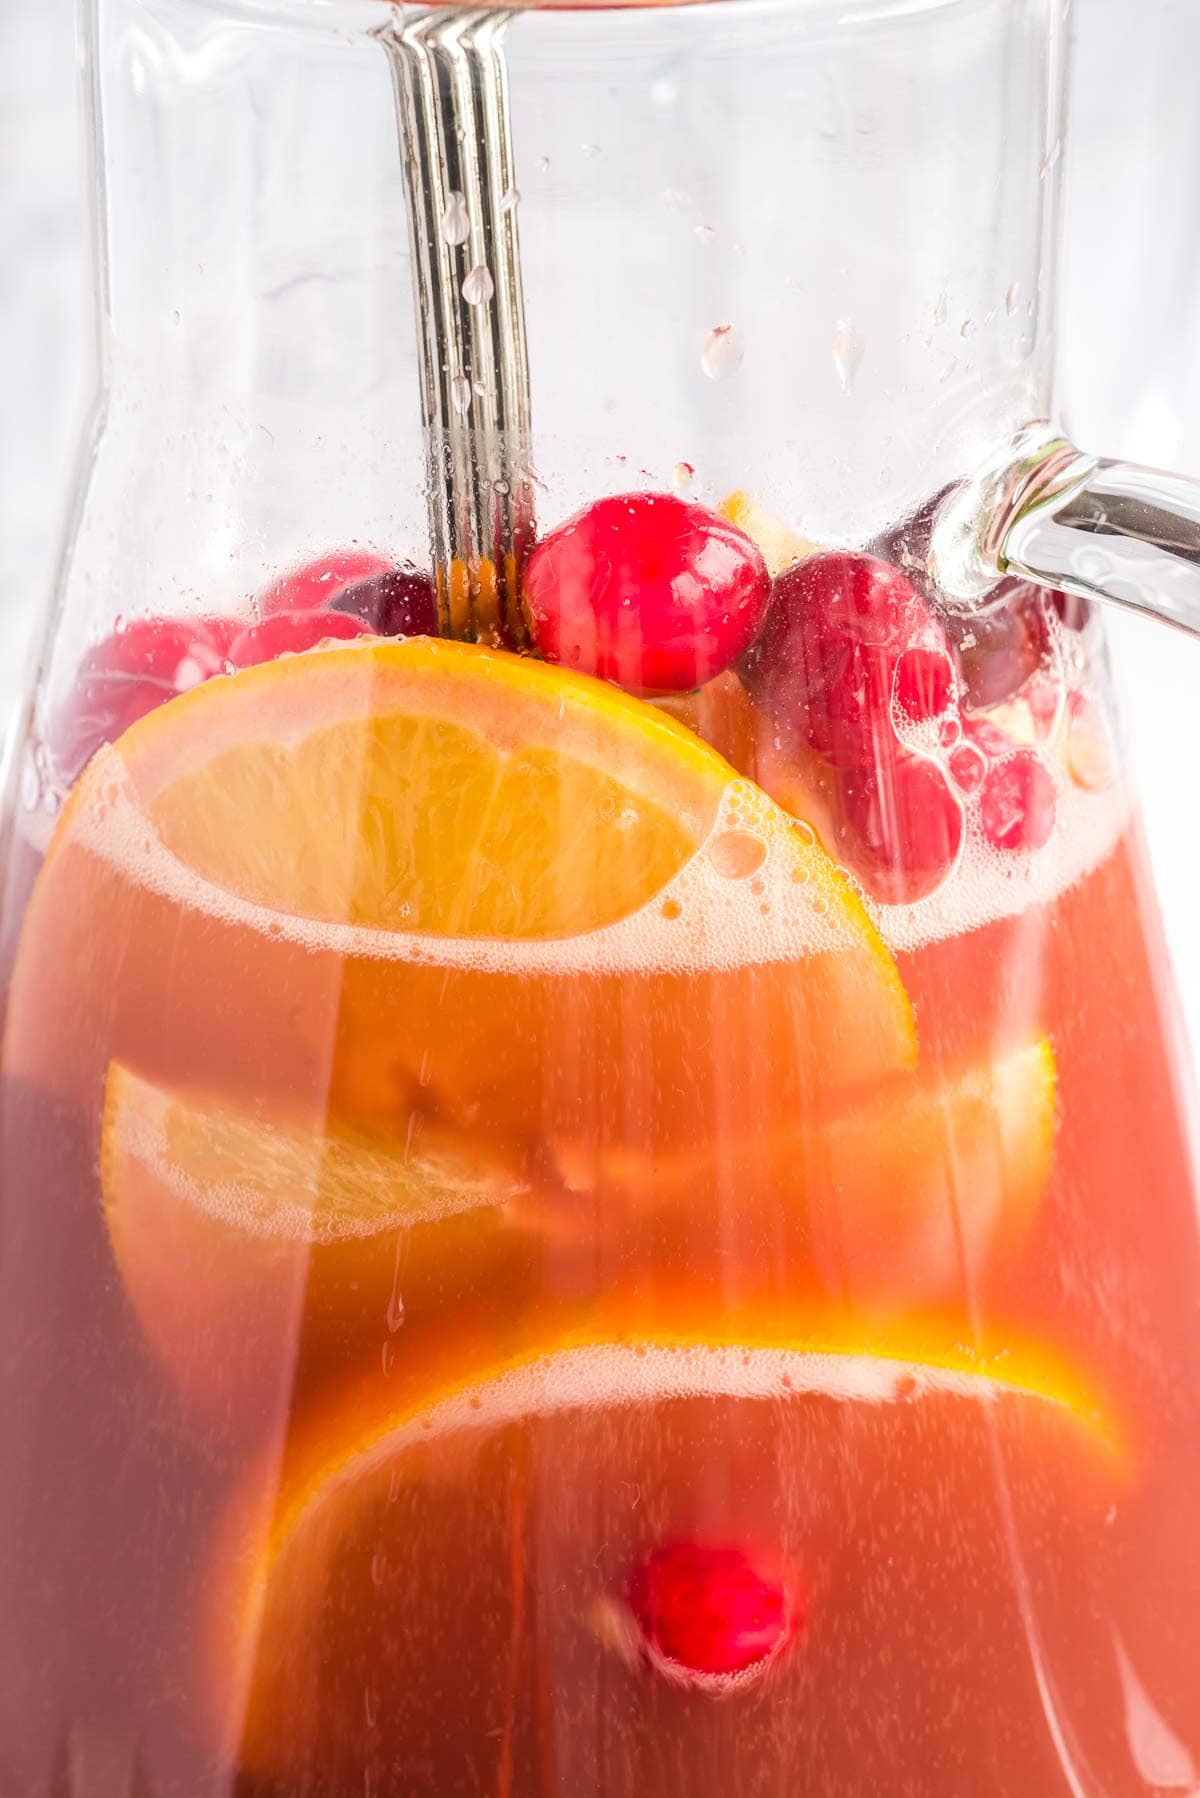 Orange slices and cranberries floating in pitcher of mimosas